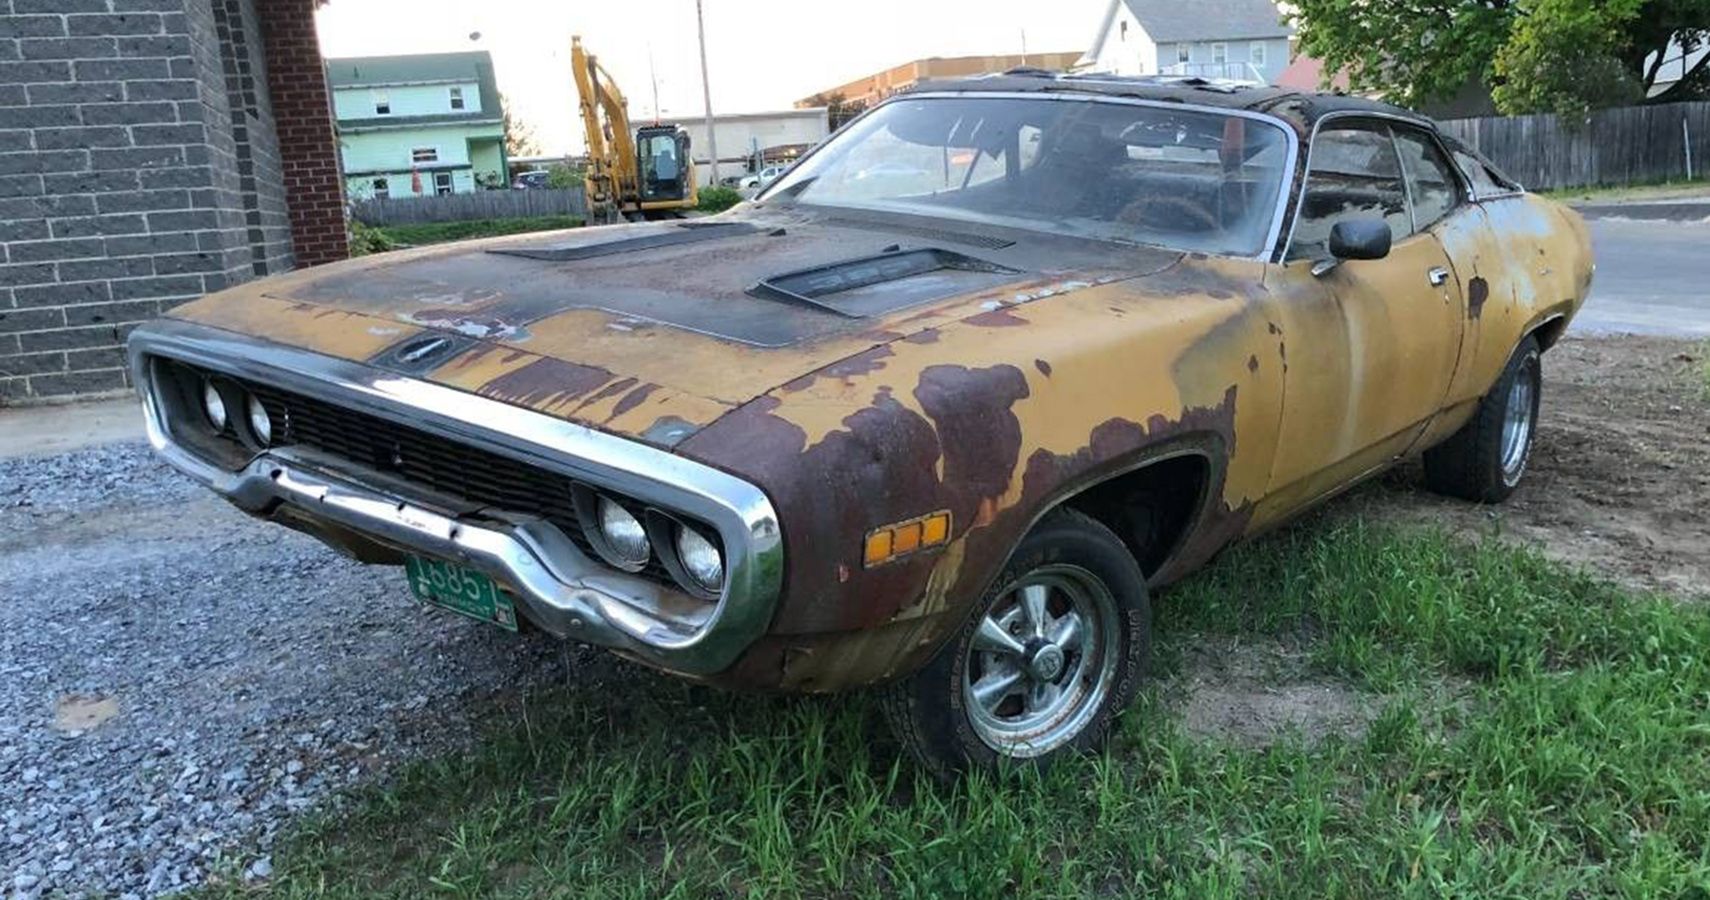 1971 Plymouth Roadrunner: Pure Stripped-Down Muscle